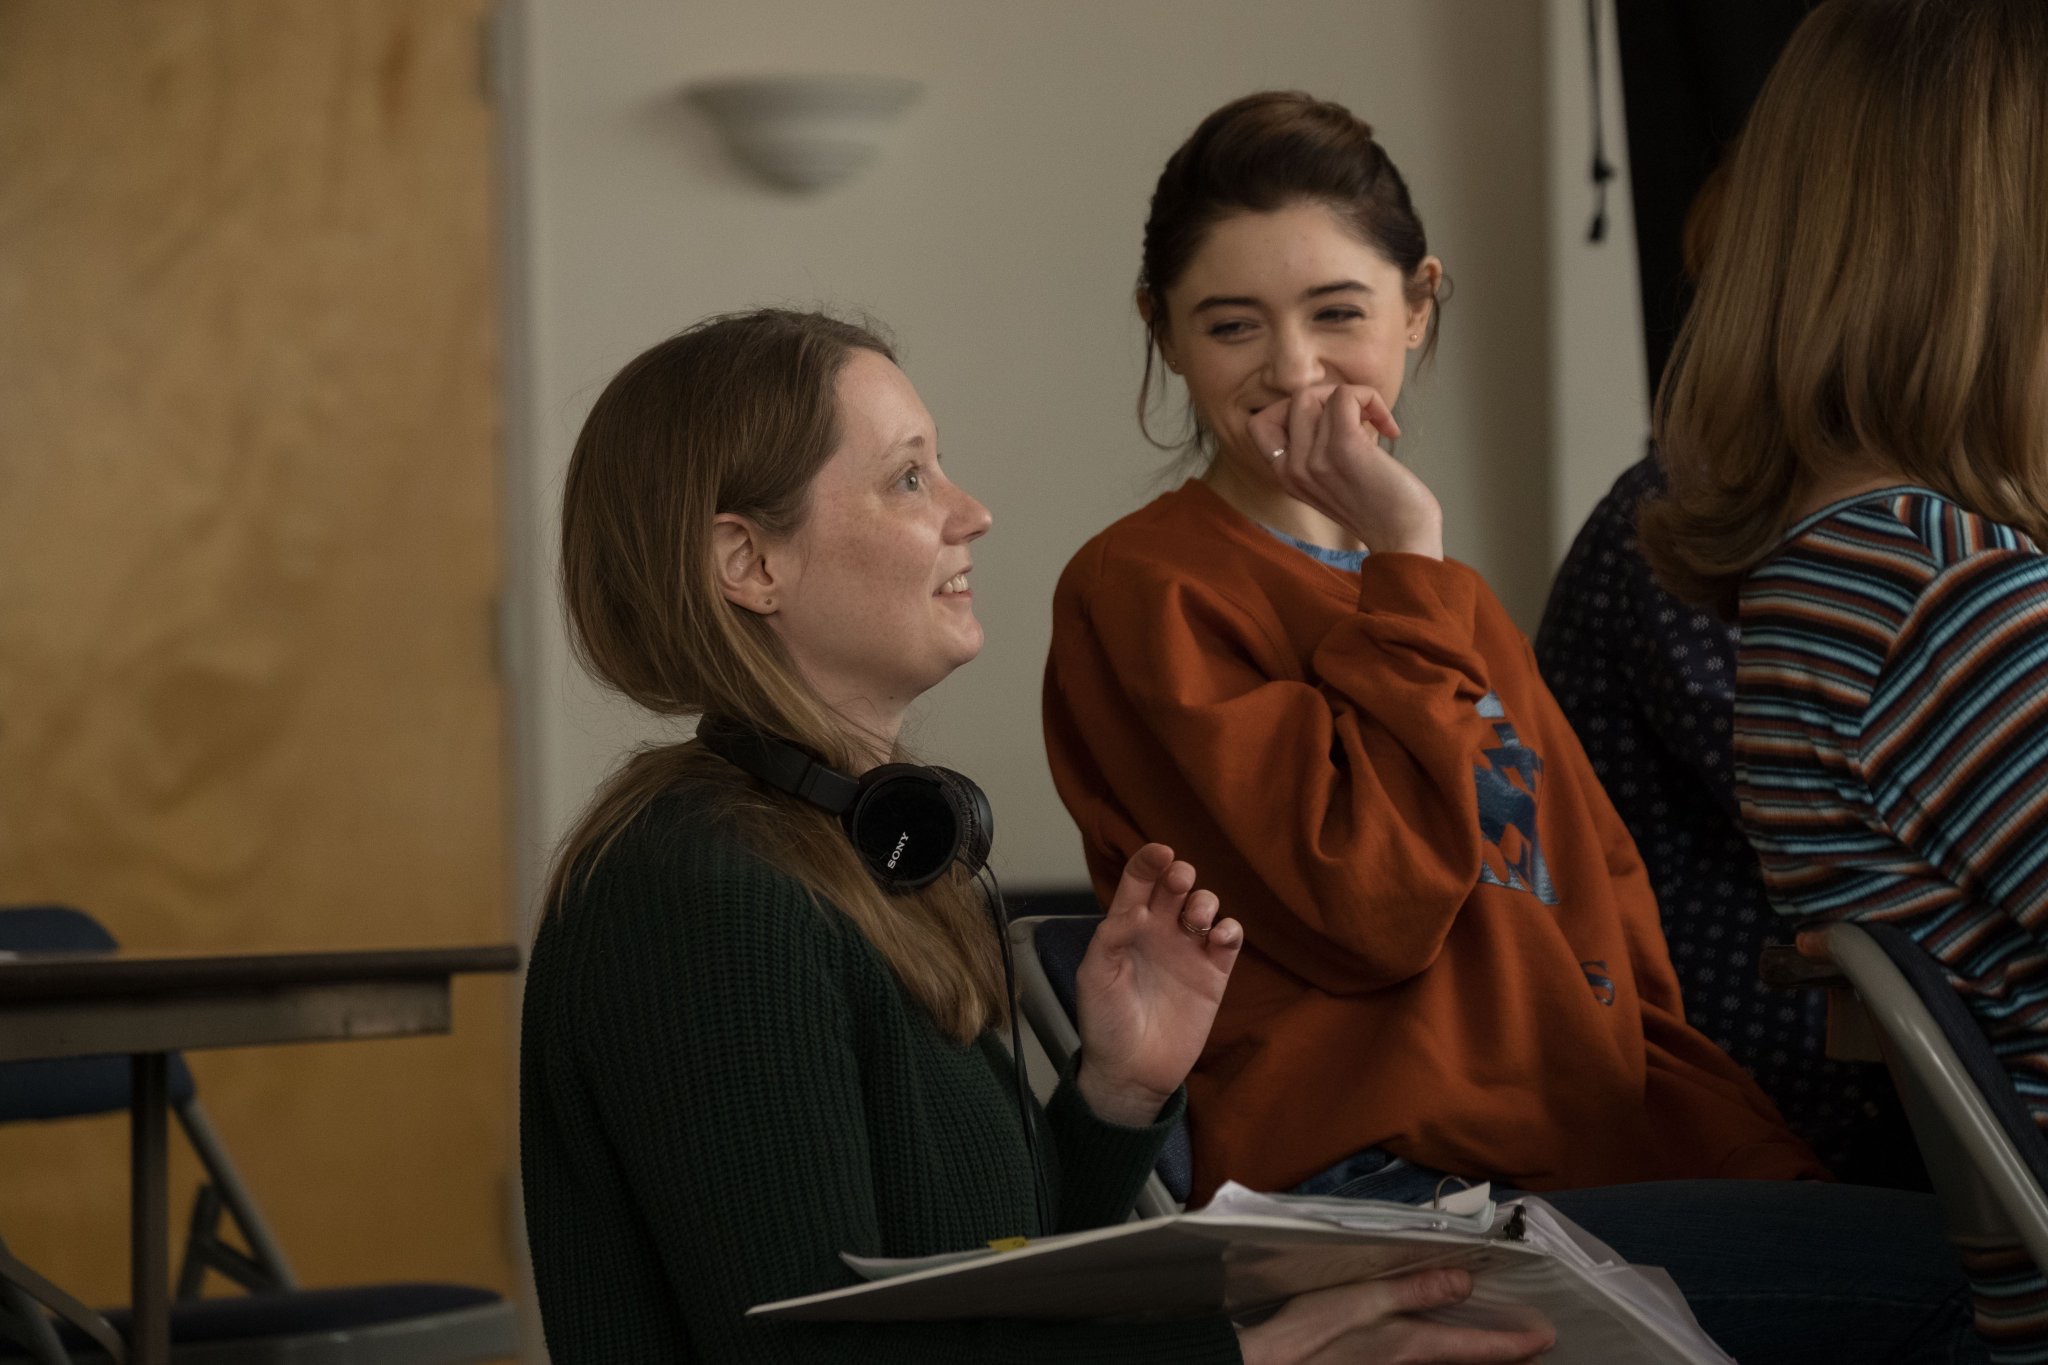 Photo of Karen Maine & Natalia Dyer on set of the Yes, God, Yes feature